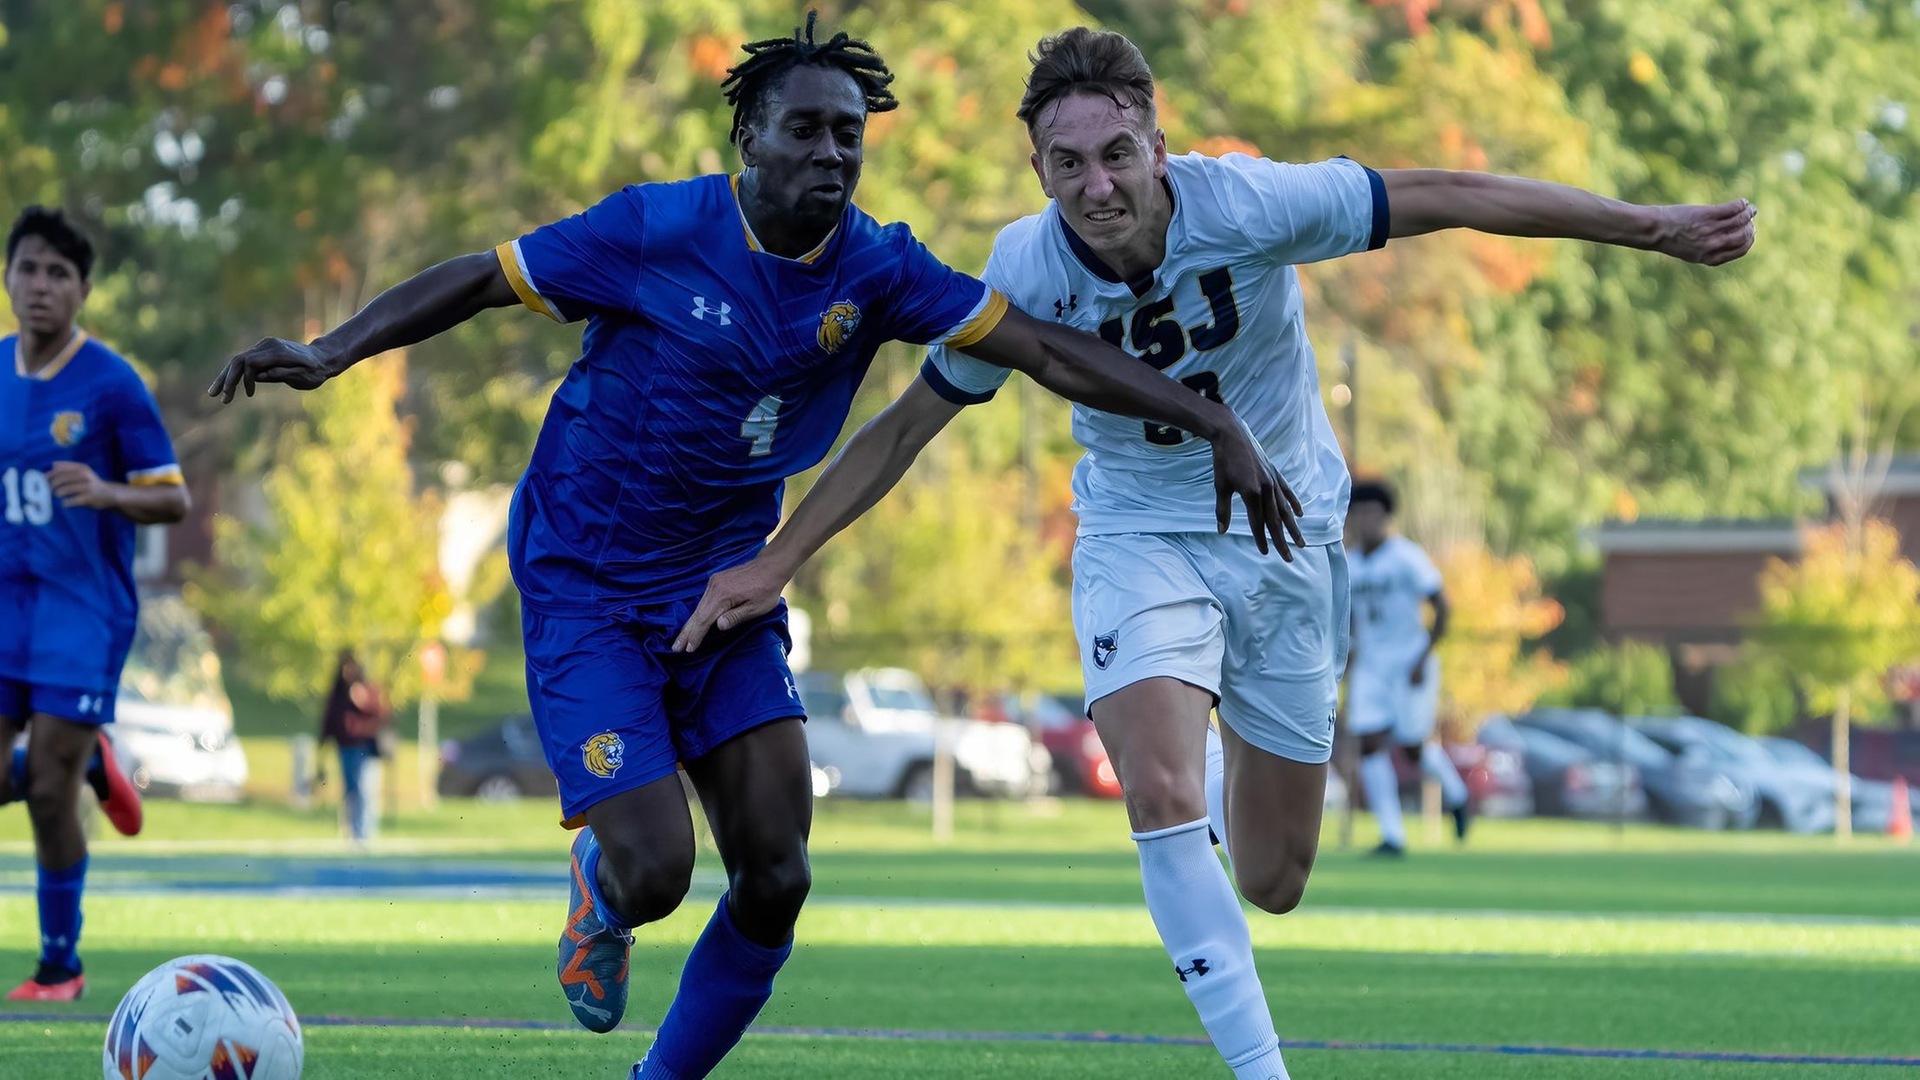 Men's Soccer Falls at Home to Johnson & Wales Tuesday